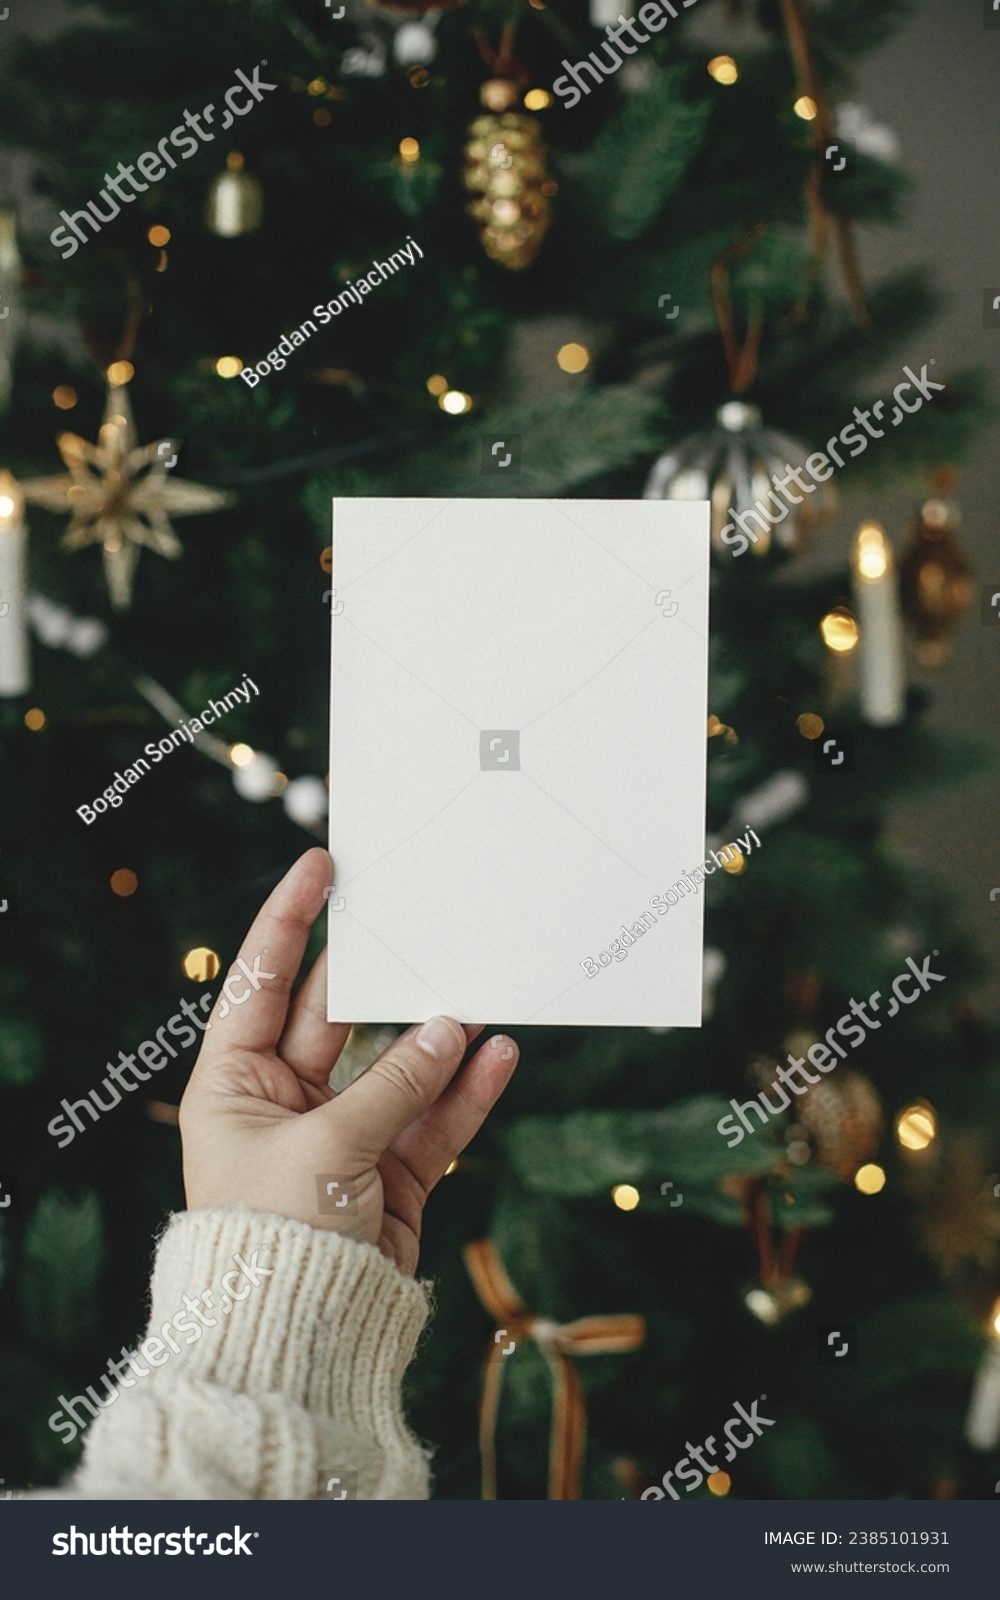 Christmas card mock up. Hand holding empty greeting card on background of stylish decorated christmas tree with golden lights. Space for text. Season greetings template and vintage ornaments #2385101931